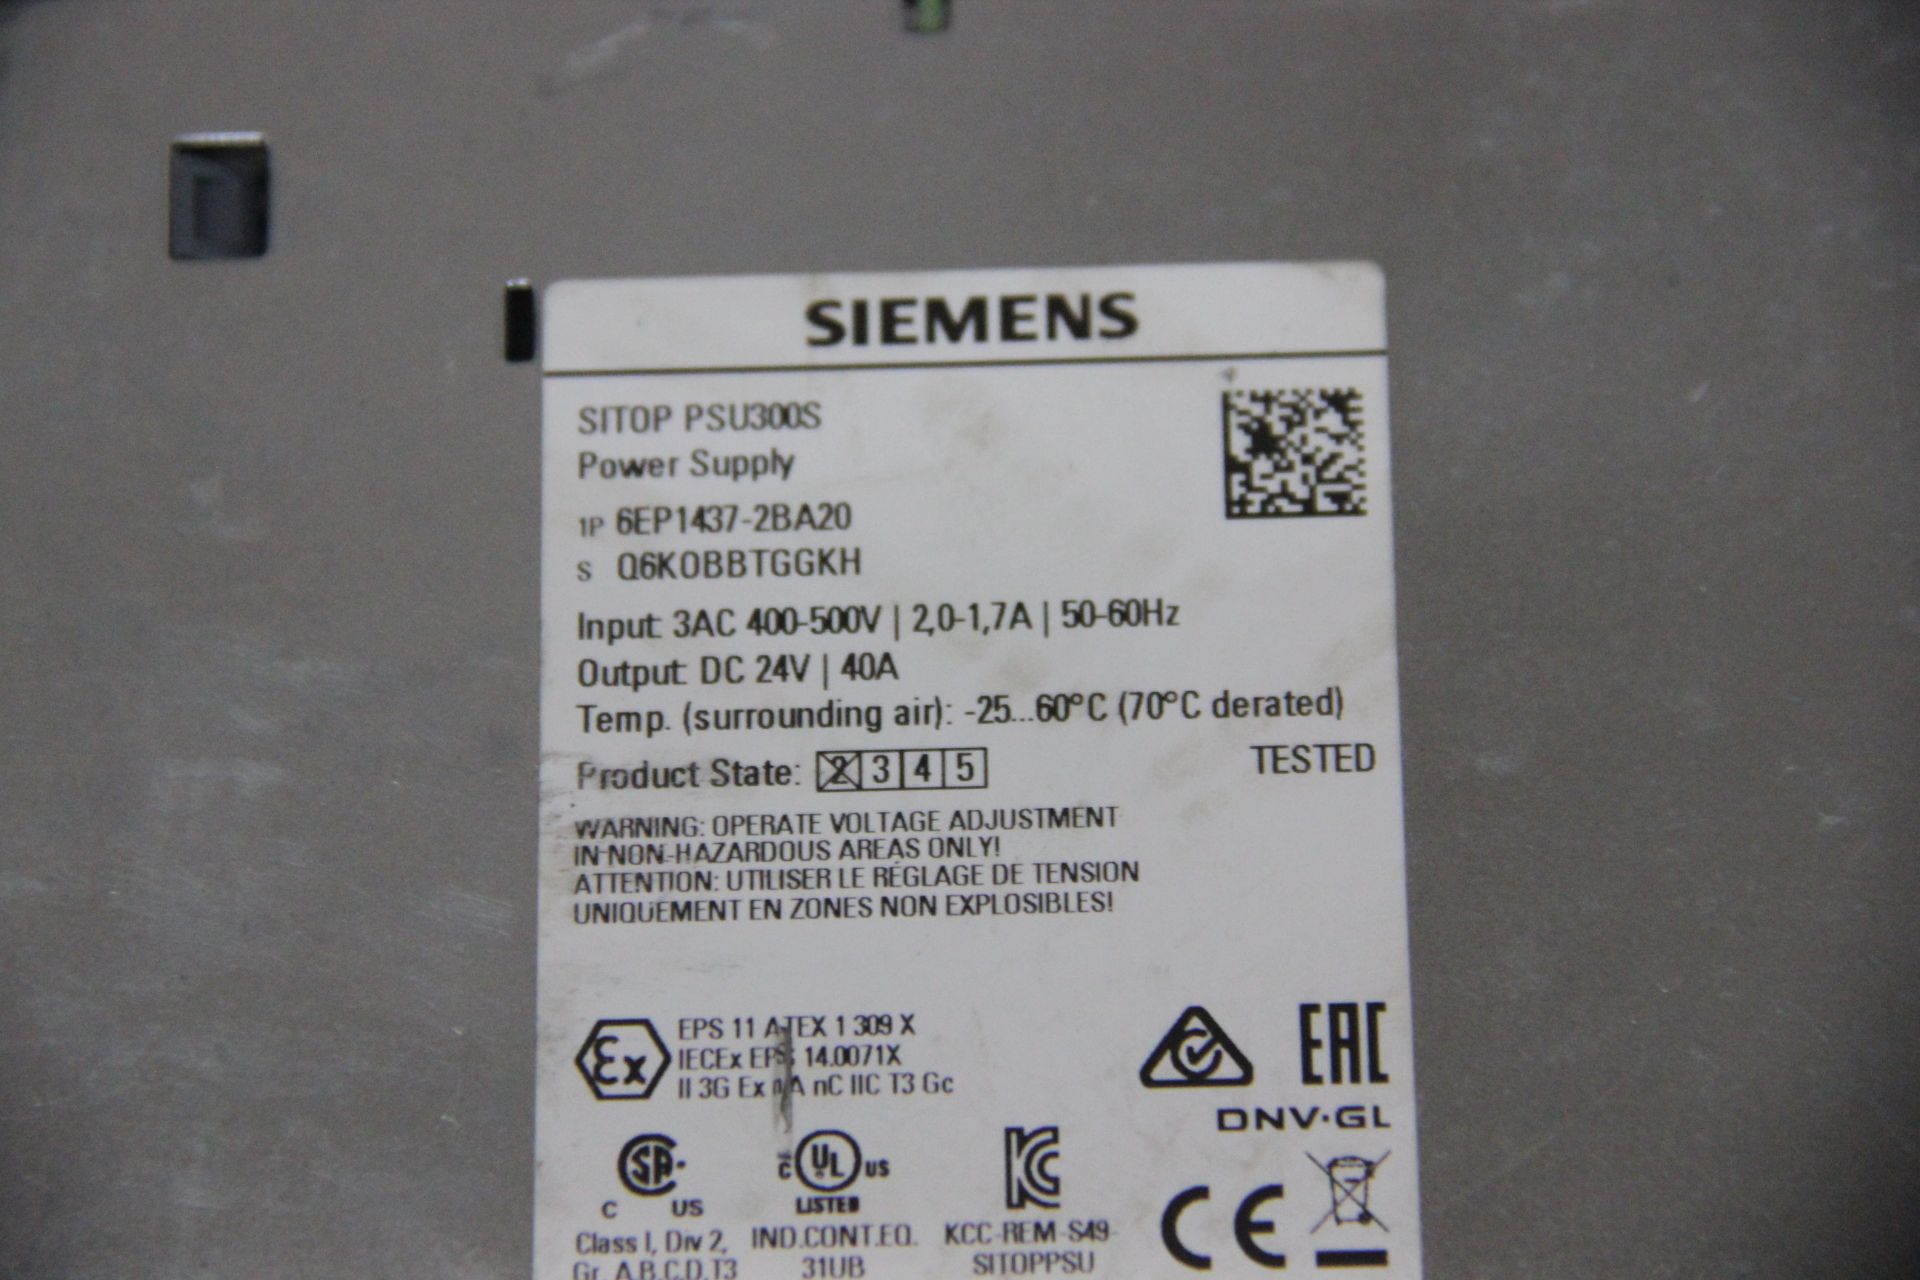 SIEMENS SITOP PSU300S AUTOMATION POWER SUPPLY - Image 3 of 3